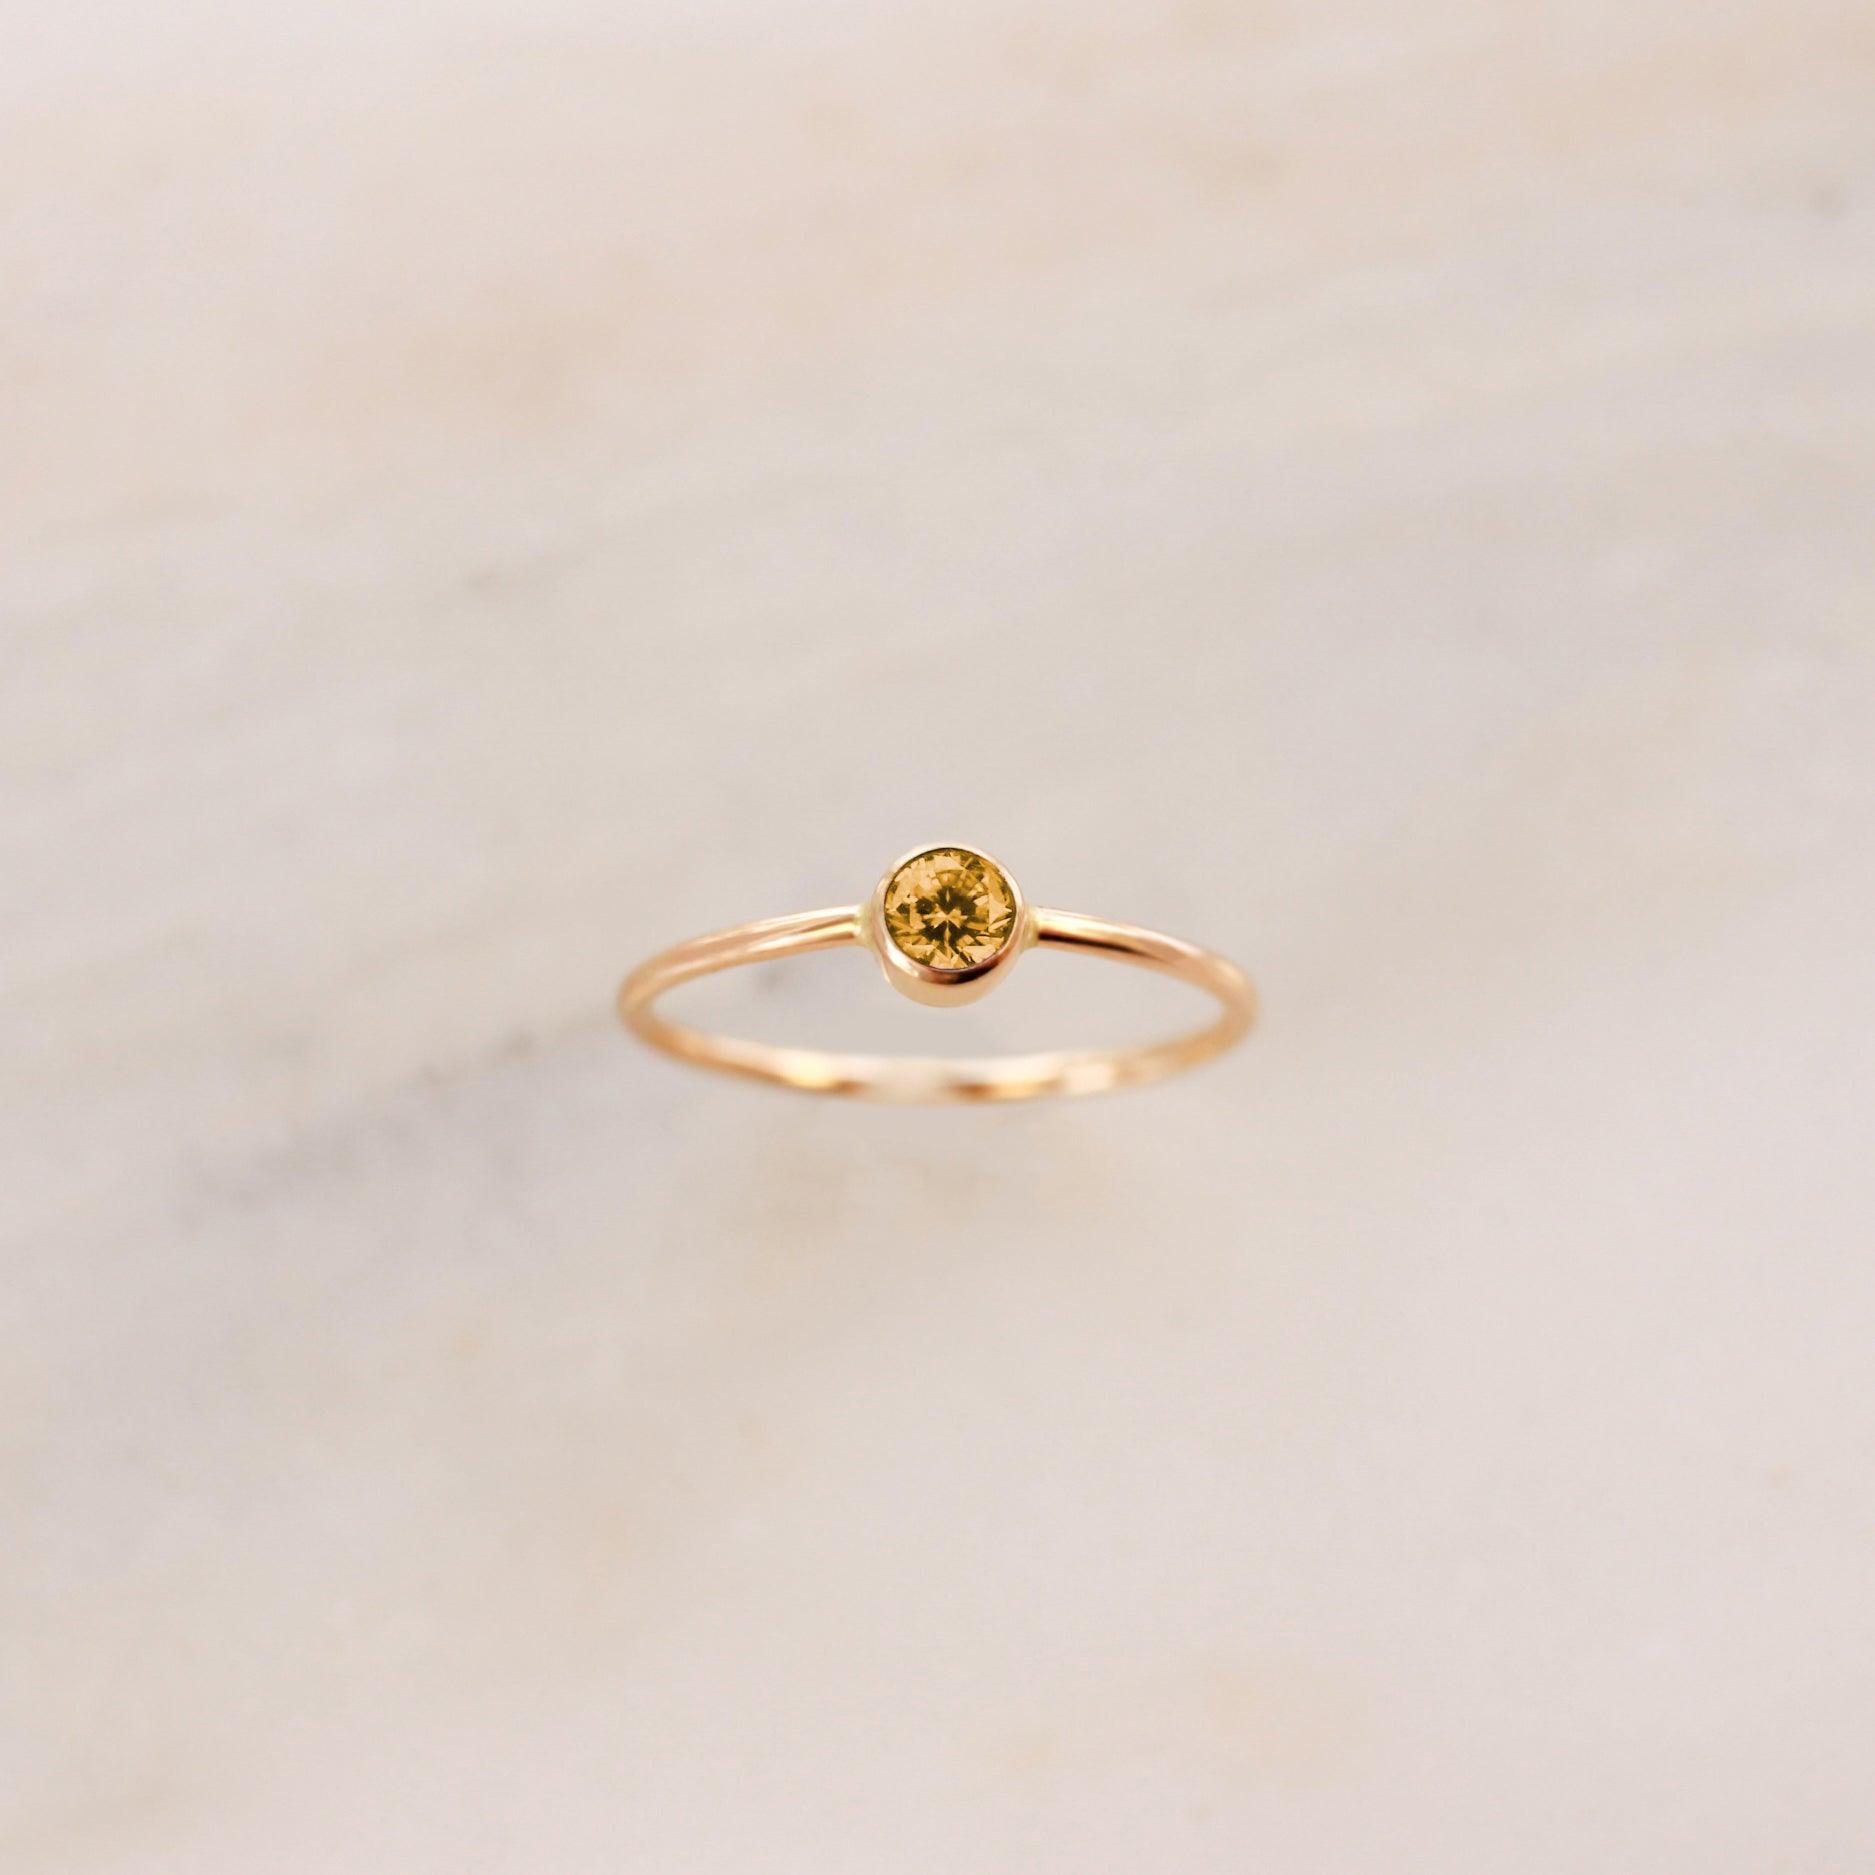 November Birthstone Ring ∙ Yellow Topaz - Nolia Jewelry - Meaningful + Sustainably Handcrafted Jewelry